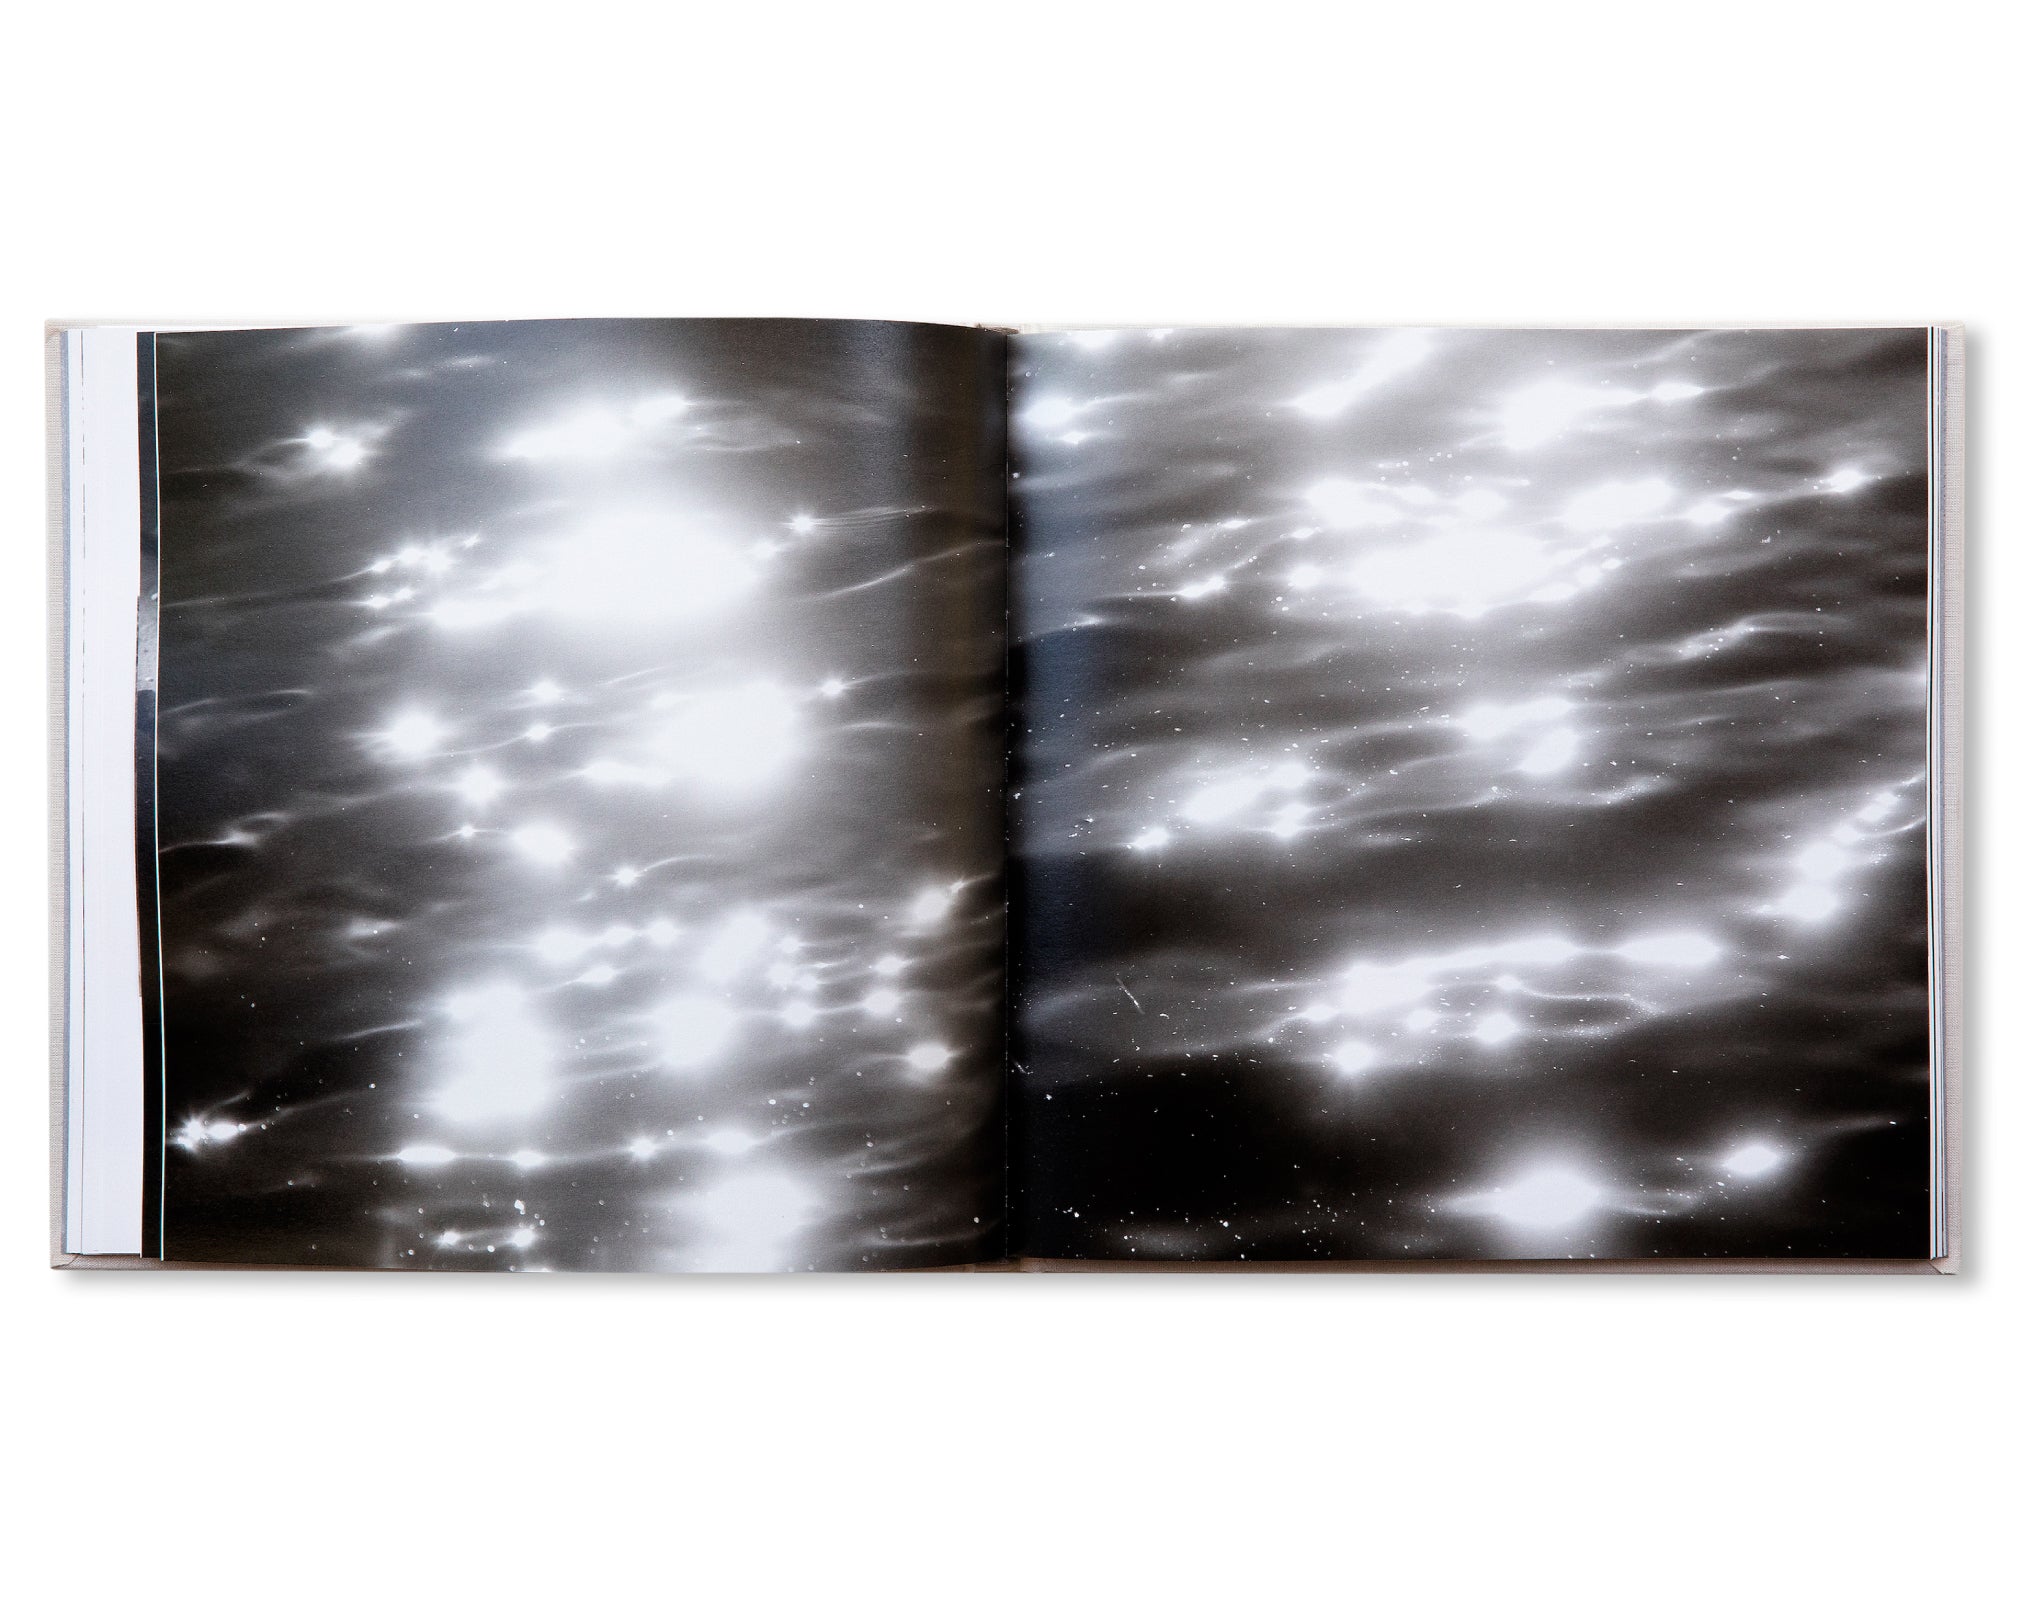 WATER LINE. A STORY OF THE PO RIVER by Sohei Nishino [SIGNED]